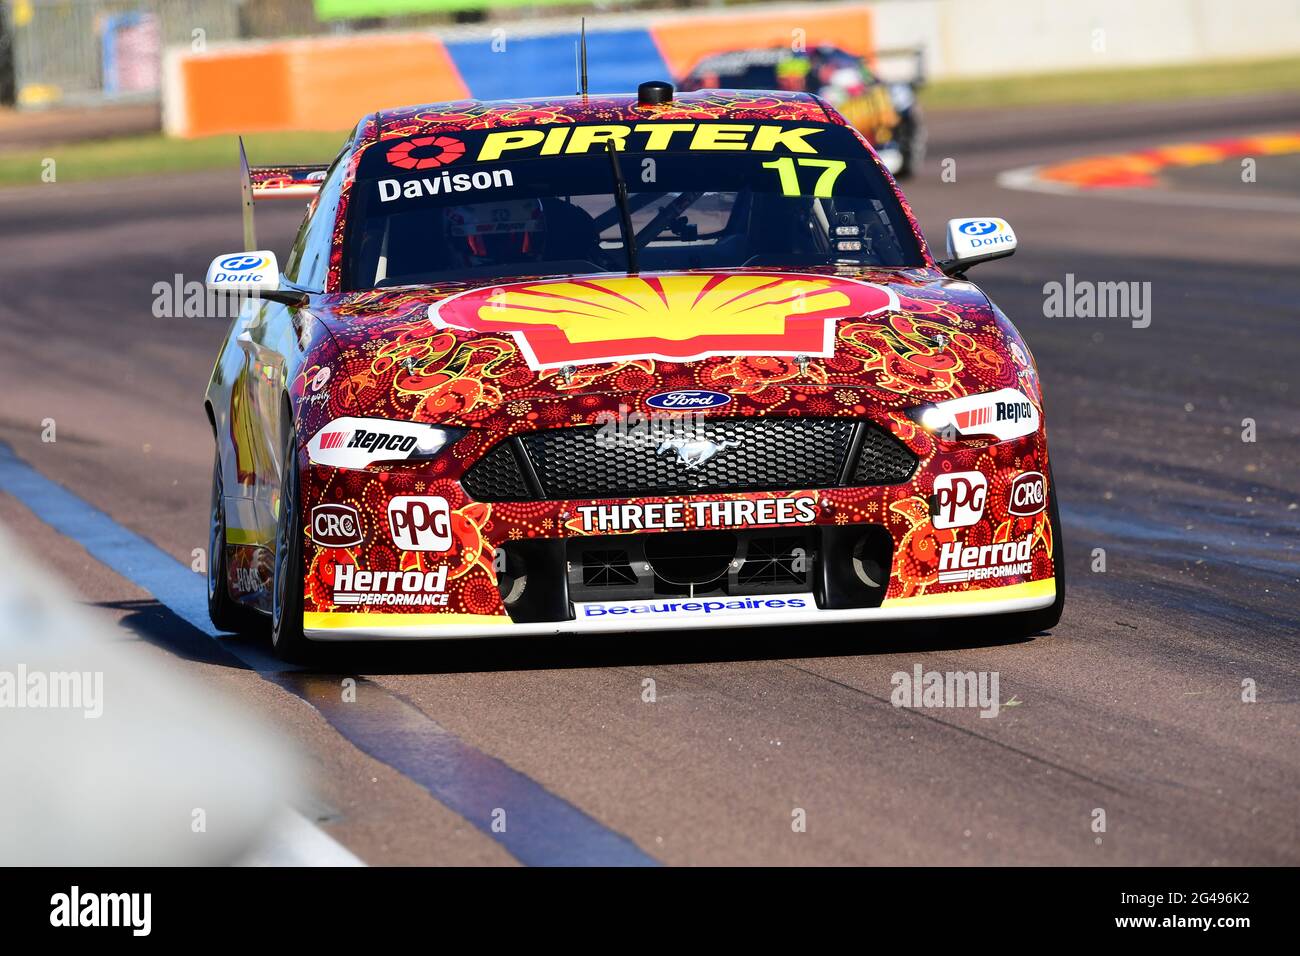 Hidden Valley. Darwin, Australia. 20 June, 2021.Pictured,  at the Australian Supercars Championship. Will Davison takes pole in qualifying for Race 14 in Qualifying 2 with a lap time of 1.04.95 in the Shell V-Power Racing Ford Mustang.  Credit: Karl Phillipson/Optikal/Alamy Live News Stock Photo